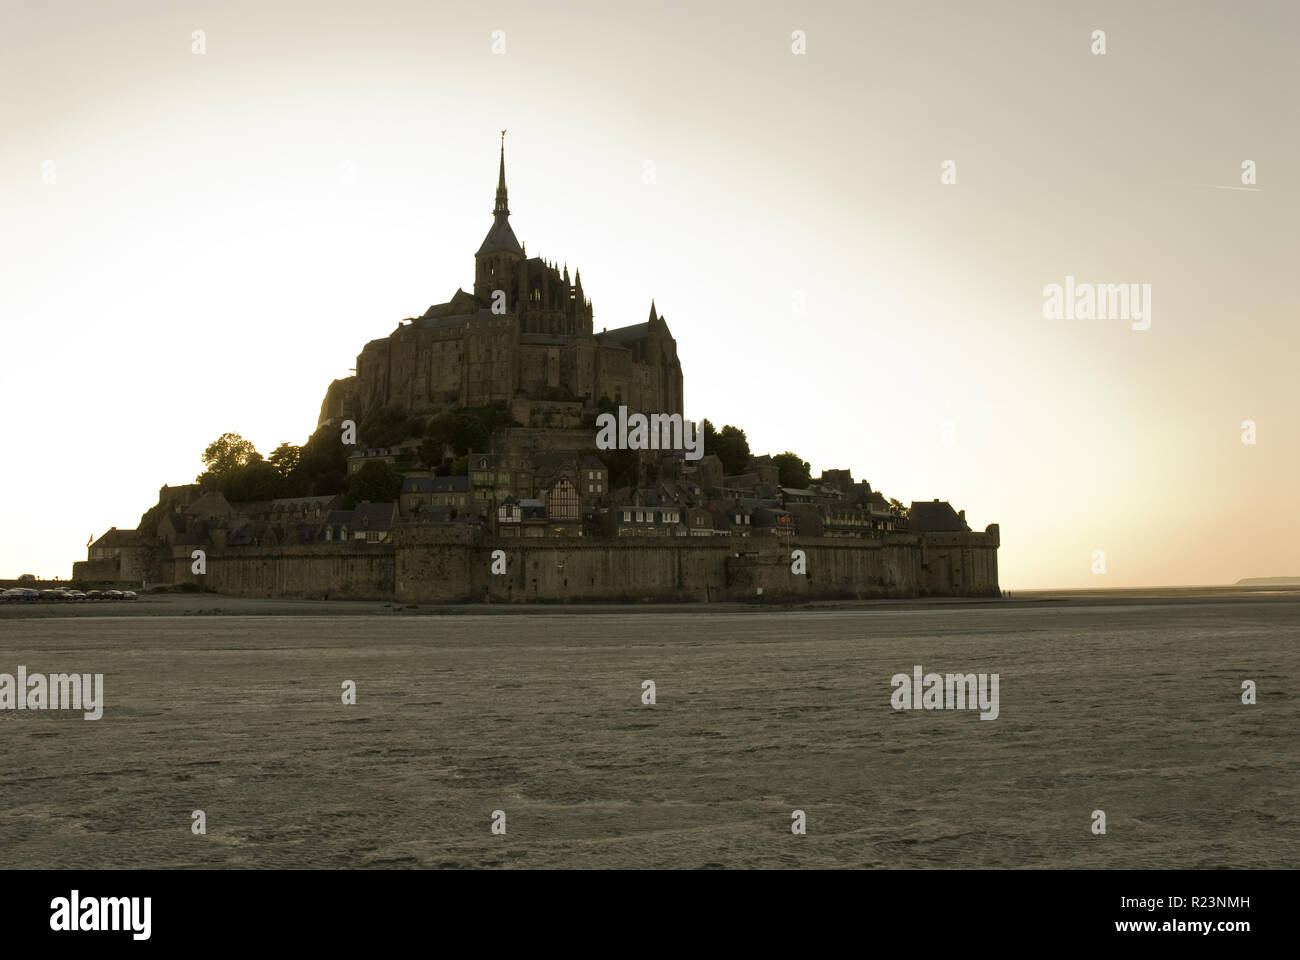 Sand flats are exposed during low tide at Mont-Saint-Michel (Le Mont-Saint-Michel), an island in Normandy, France known for its monastery. Stock Photo